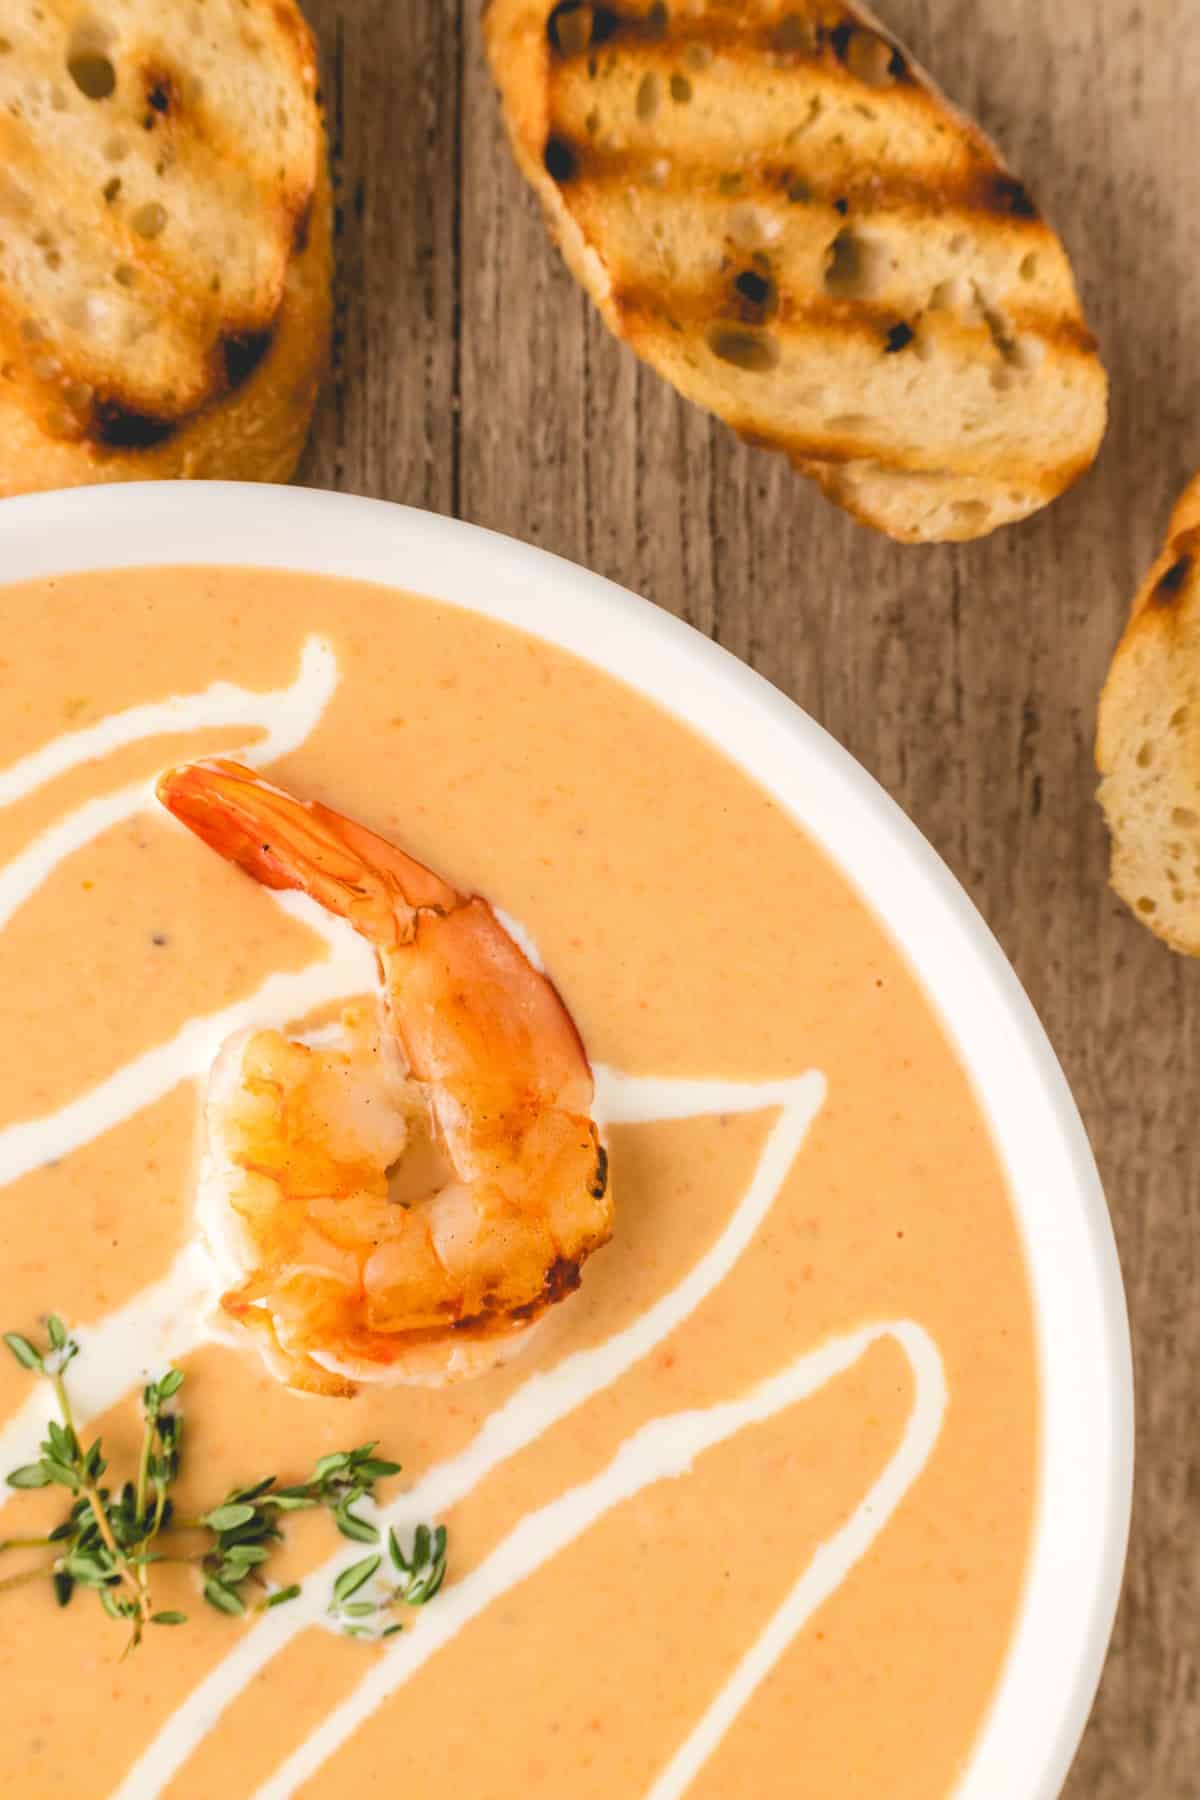 Showing a shrimp to the side of a bowl of soup with fresh thyme also. 